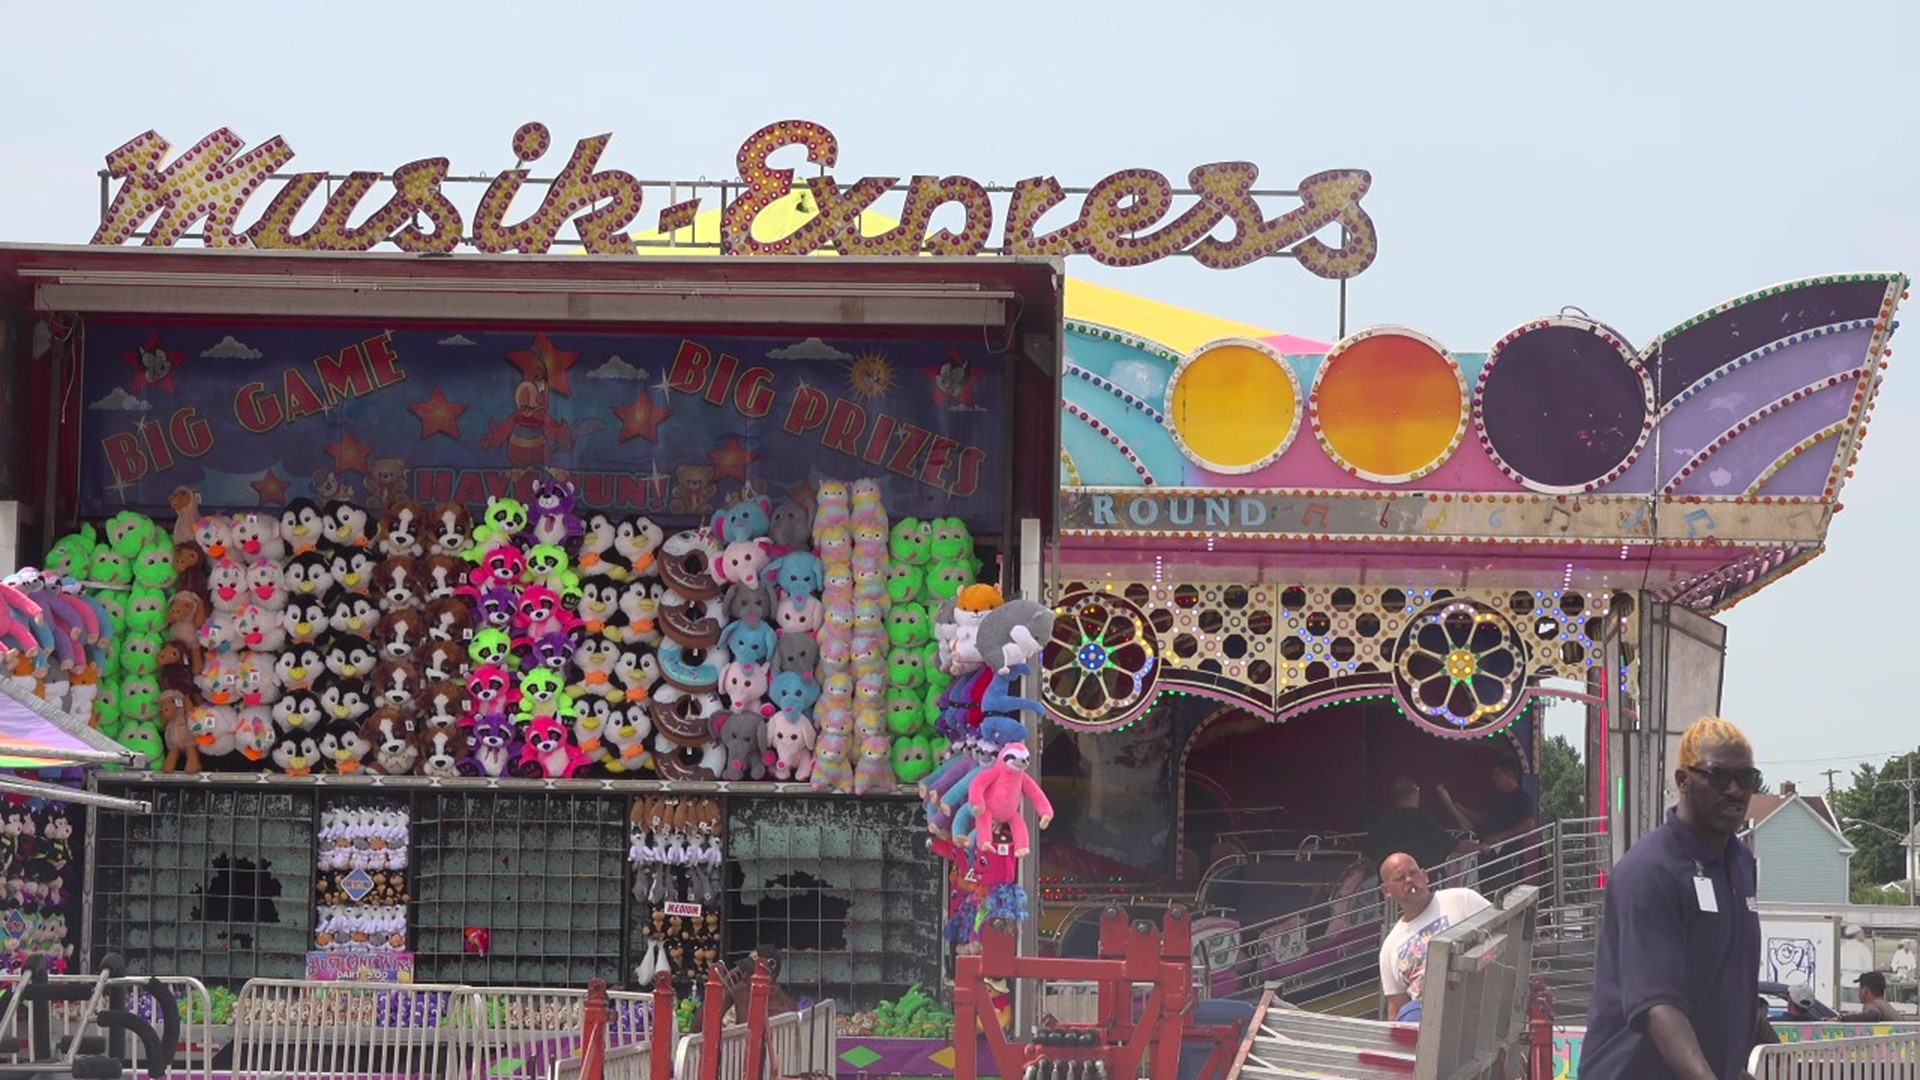 After a year hiatus due to the pandemic, the York State Fair gates will open at 11:00 a.m. on Friday.